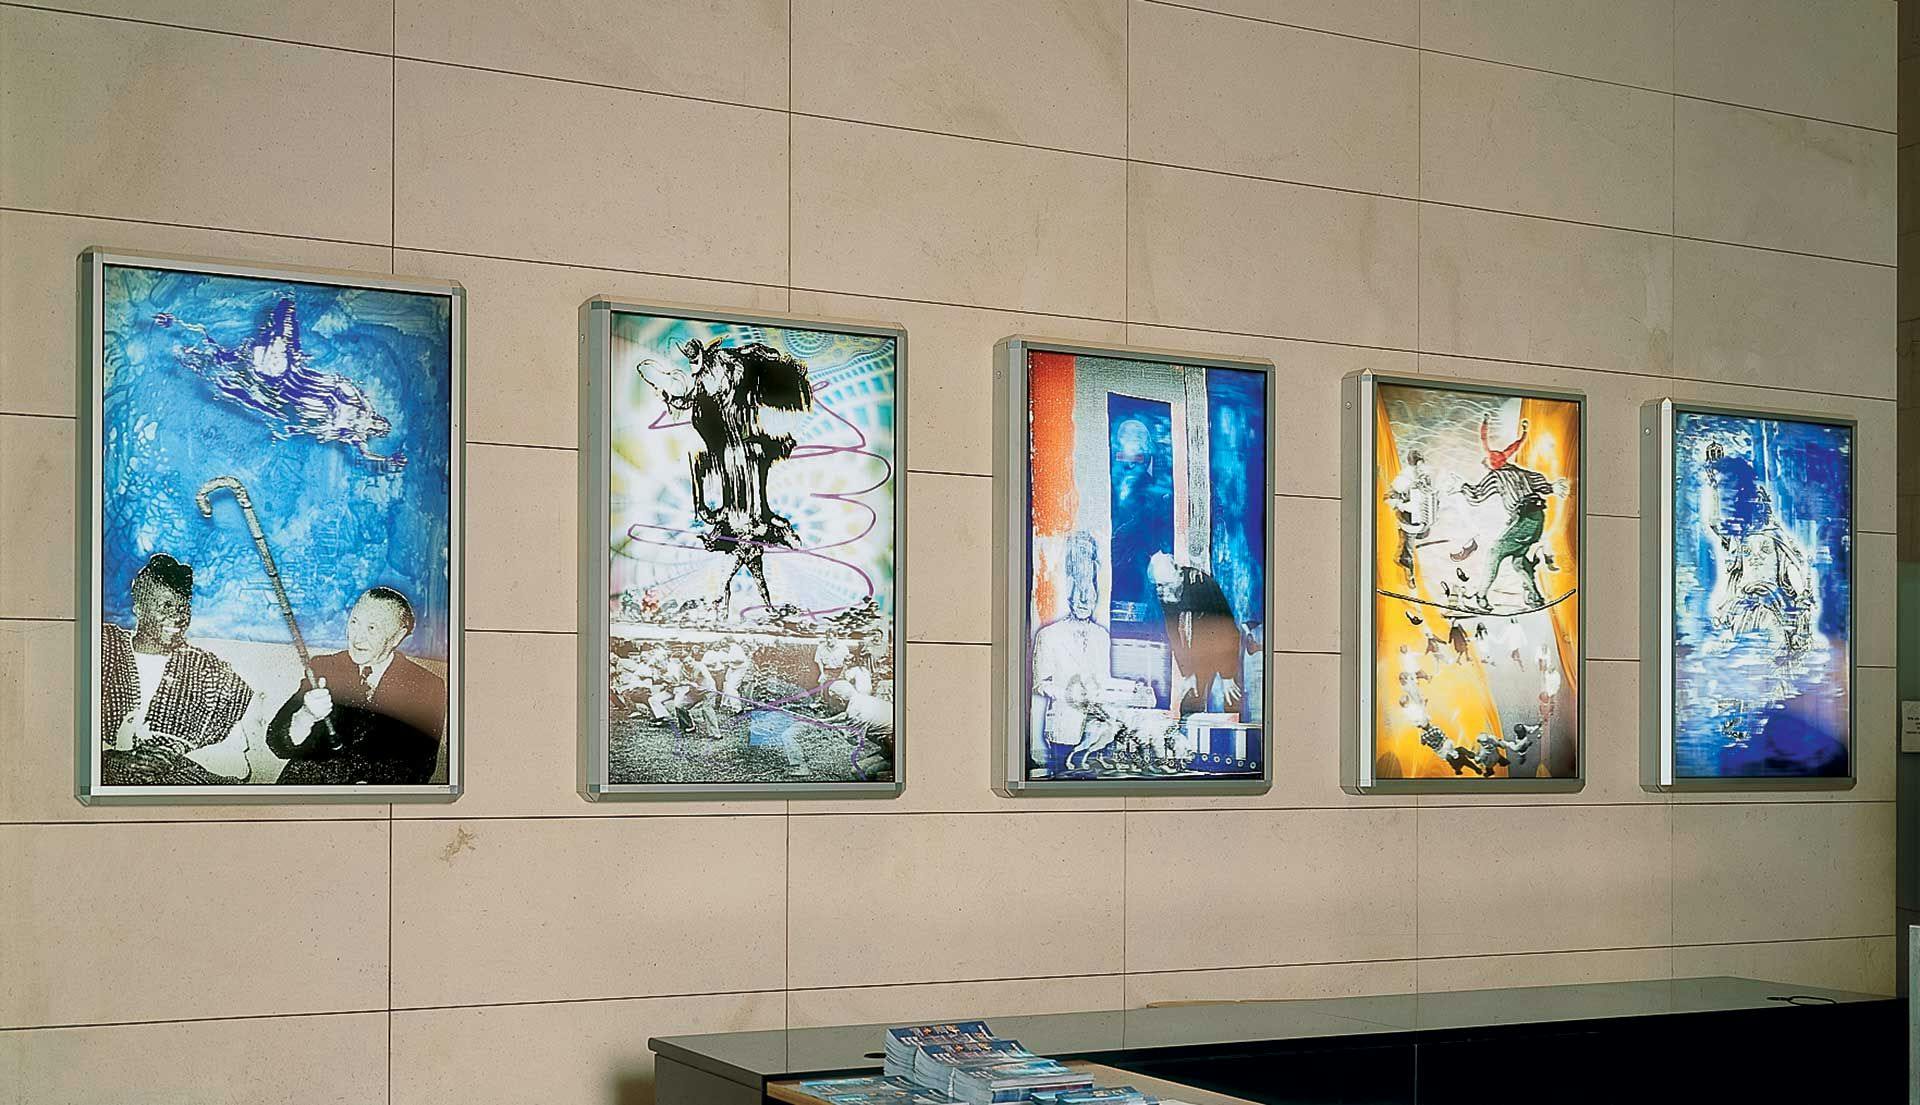 A 5-part lightbox installation by Sigmar Polke, titled Vor-Ort-Sein (Being There), dated 1998-99.